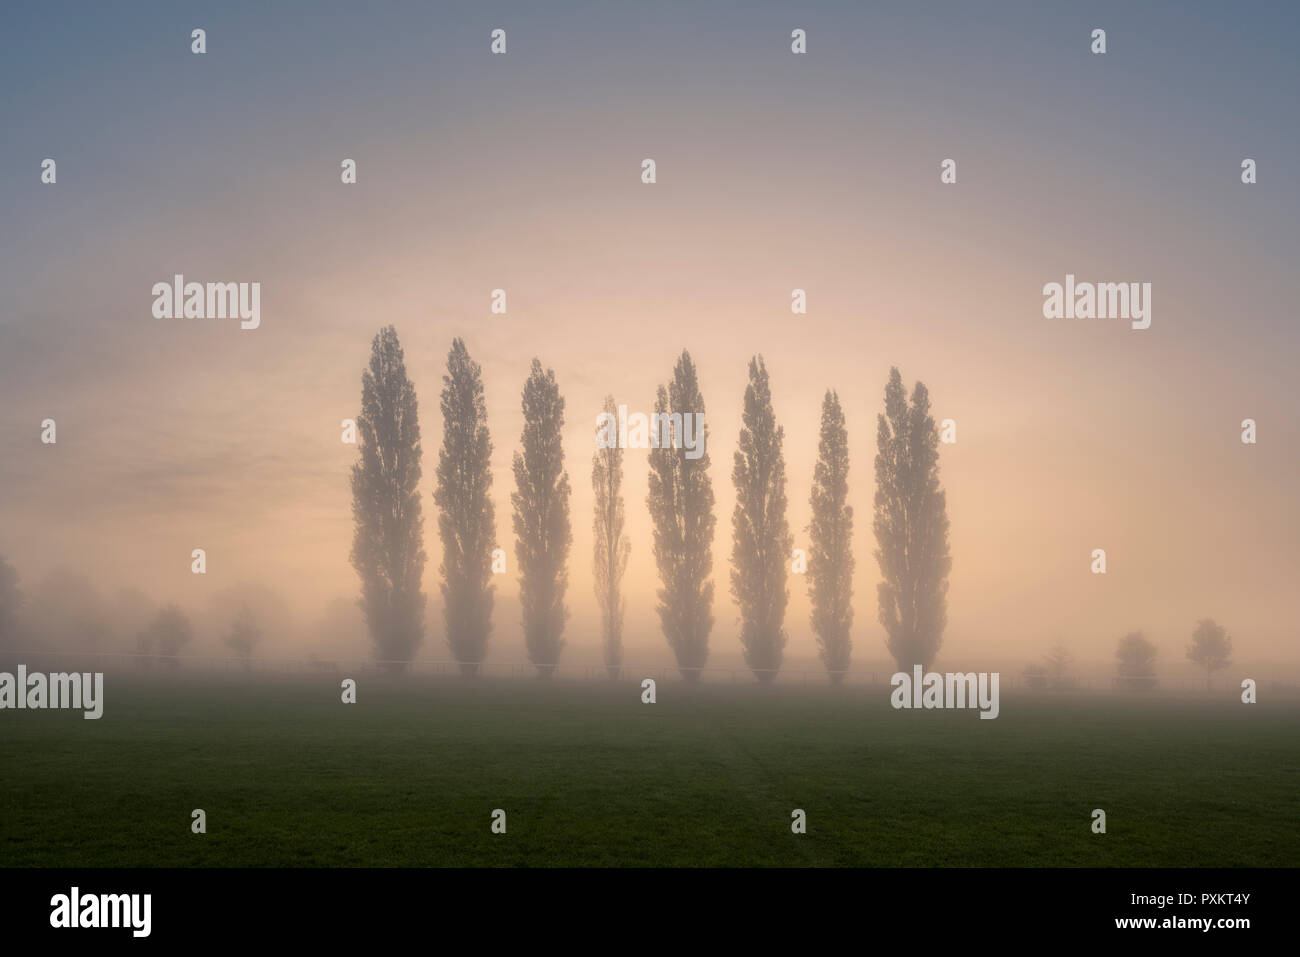 Autumn sunrise behind a row of Lombardy Poplar trees at the recreation ground in the North Somerset village of Wrington. These trees are a memorial to the 8 villagers killed in April 1973 when a flight from Bristol Airport to Basle crashed in the Swiss Alps. Stock Photo